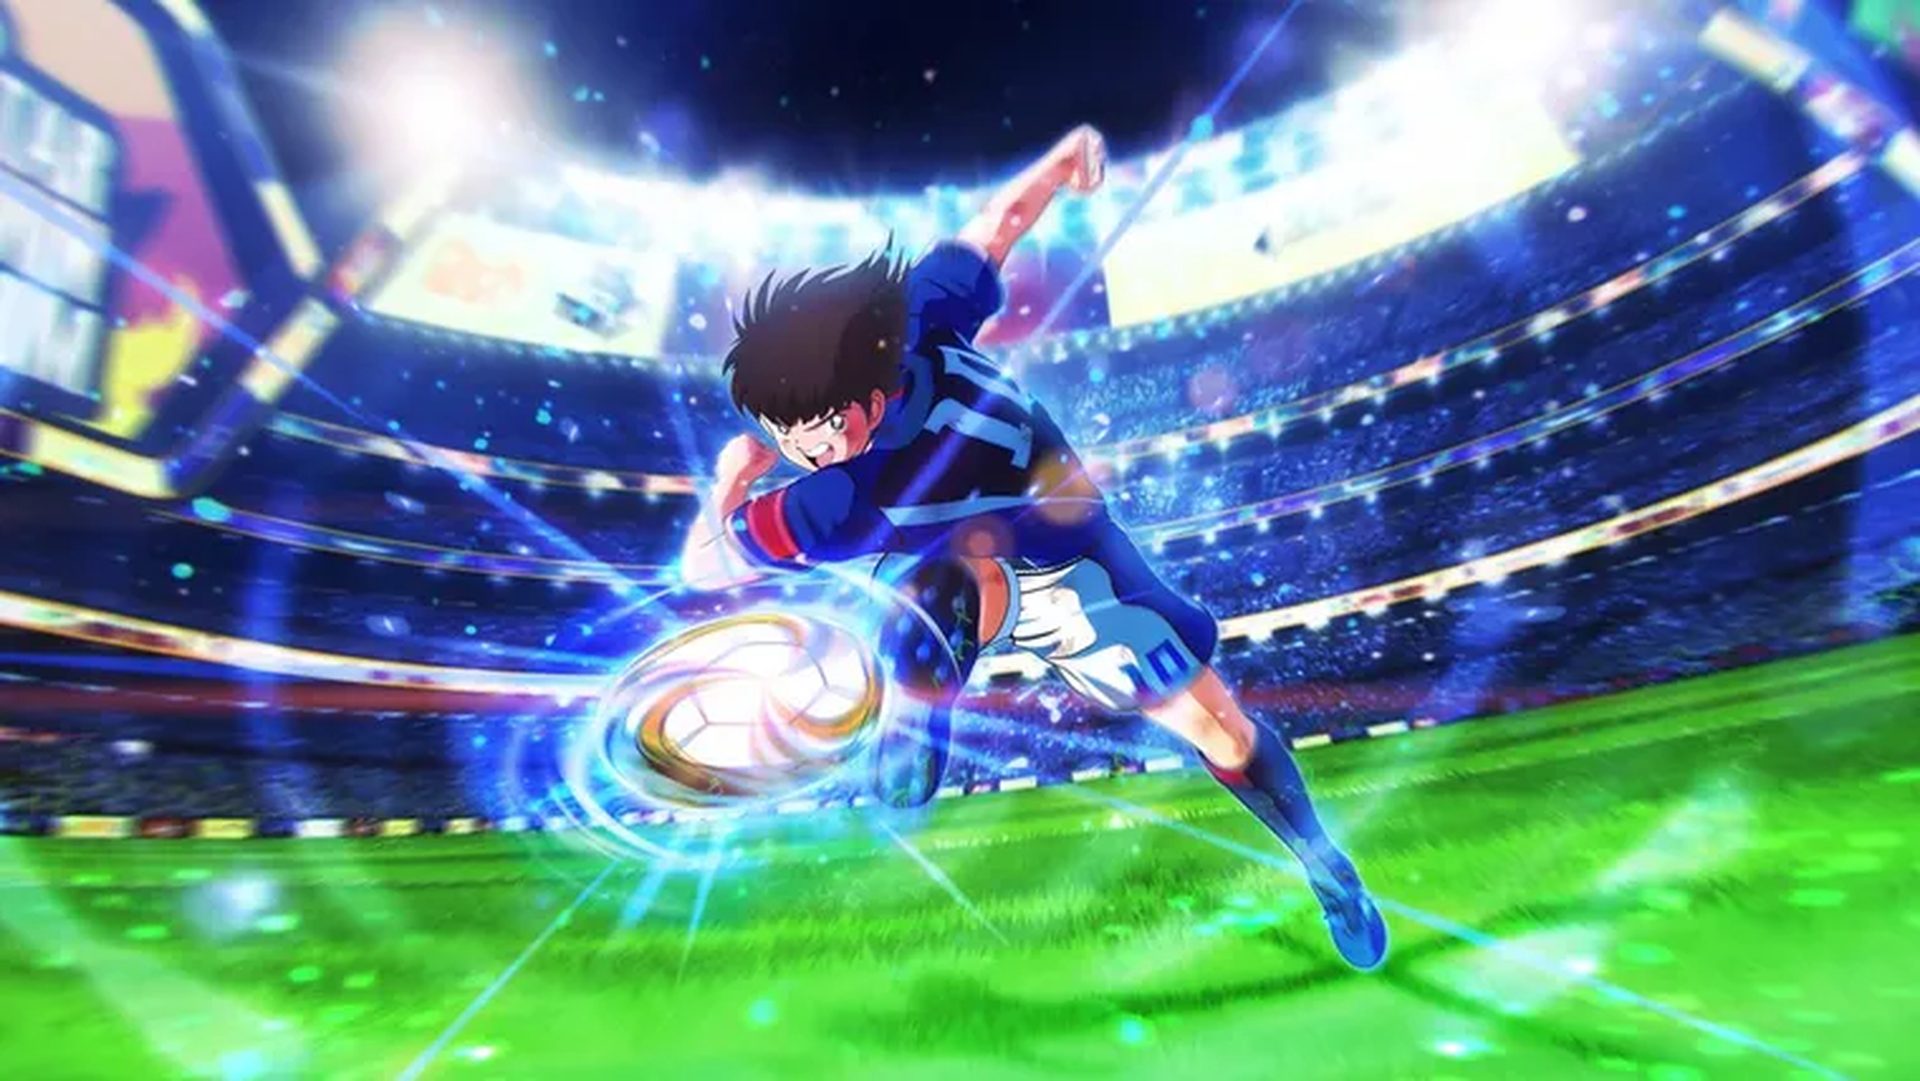 Best football animes and mangas